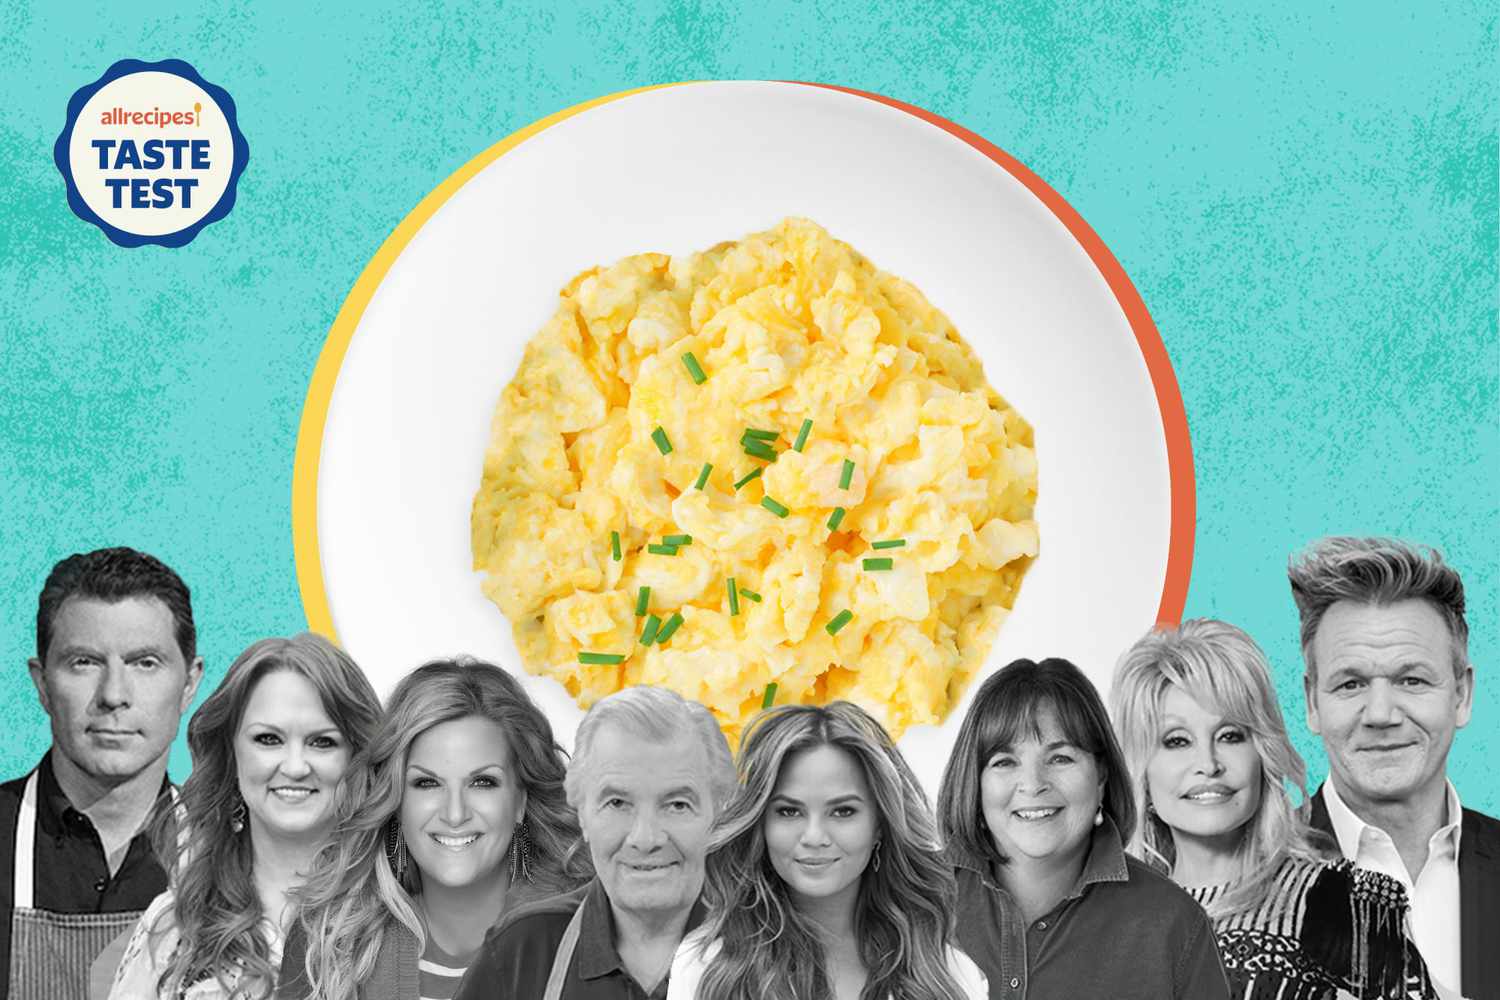 Scrambled eggs surrounded by Bobby Flay, Ree Drummond, Trisha Yearwood, Jacques Pepin, Chrissy Teigen, Ina Garten, Dolly Parton, and Gordon Ramsay